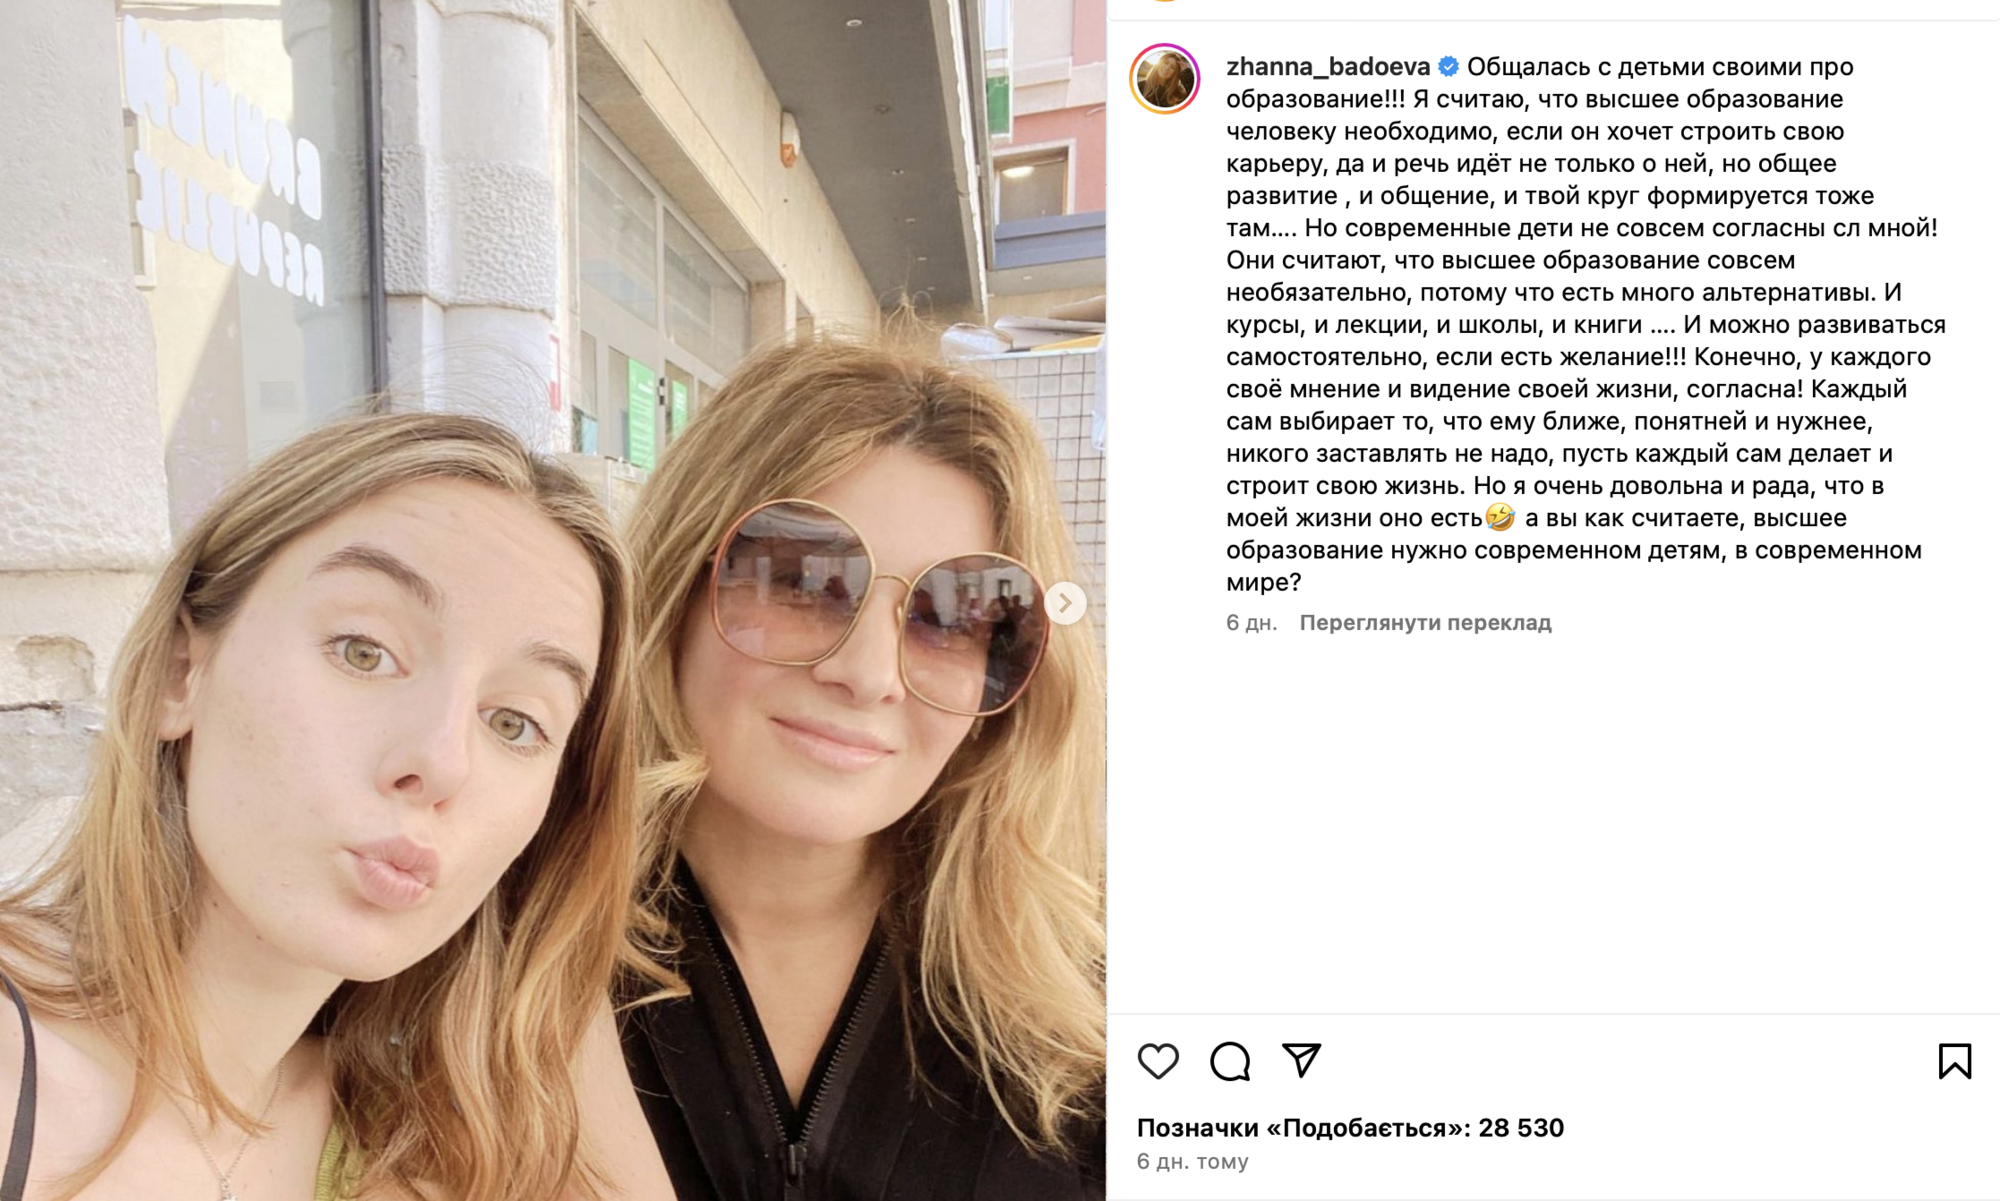 What Alan Badoiev's children look like and what they do: his son conquers the world of cinema, and modeling agencies are ''crying'' for his daughter